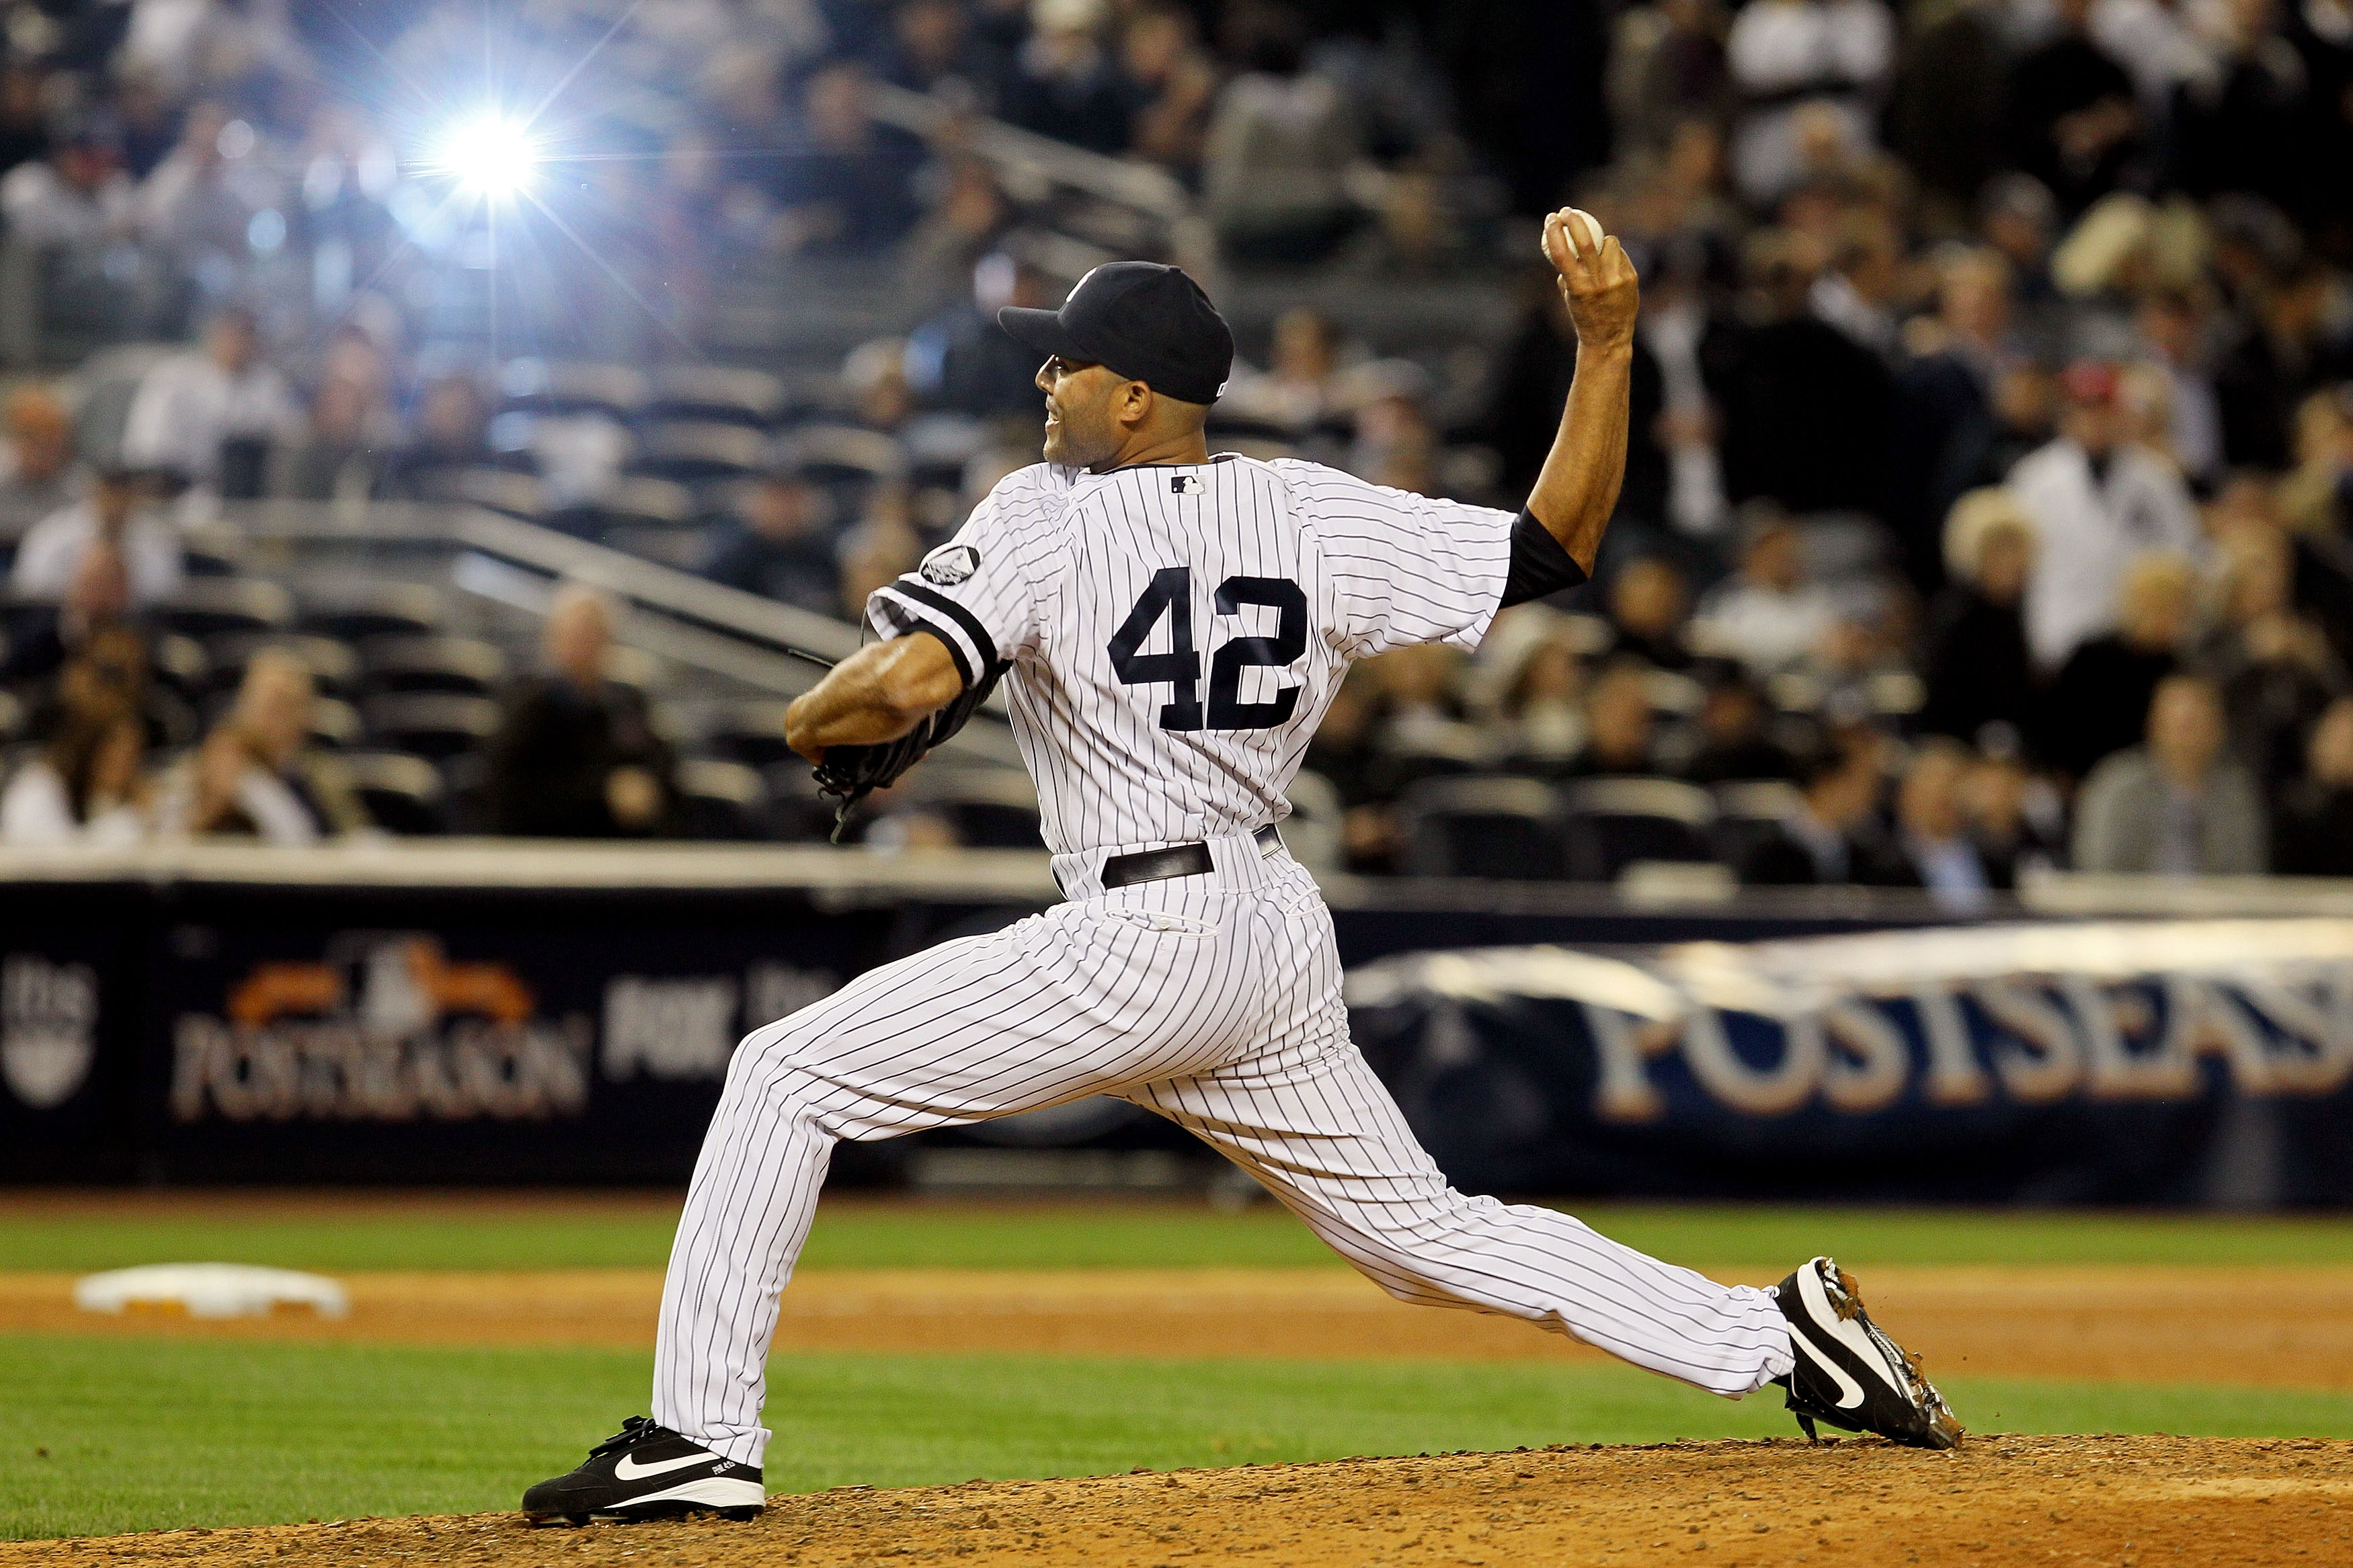 NEW YORK - OCTOBER 20:  Mariano Rivera #42 of the New York Yankees pitches against the Texas Rangers in Game Five of the ALCS during the 2010 MLB Playoffs at Yankee Stadium on October 20, 2010 in the Bronx borough of New York City.  (Photo by Jim McIsaac/